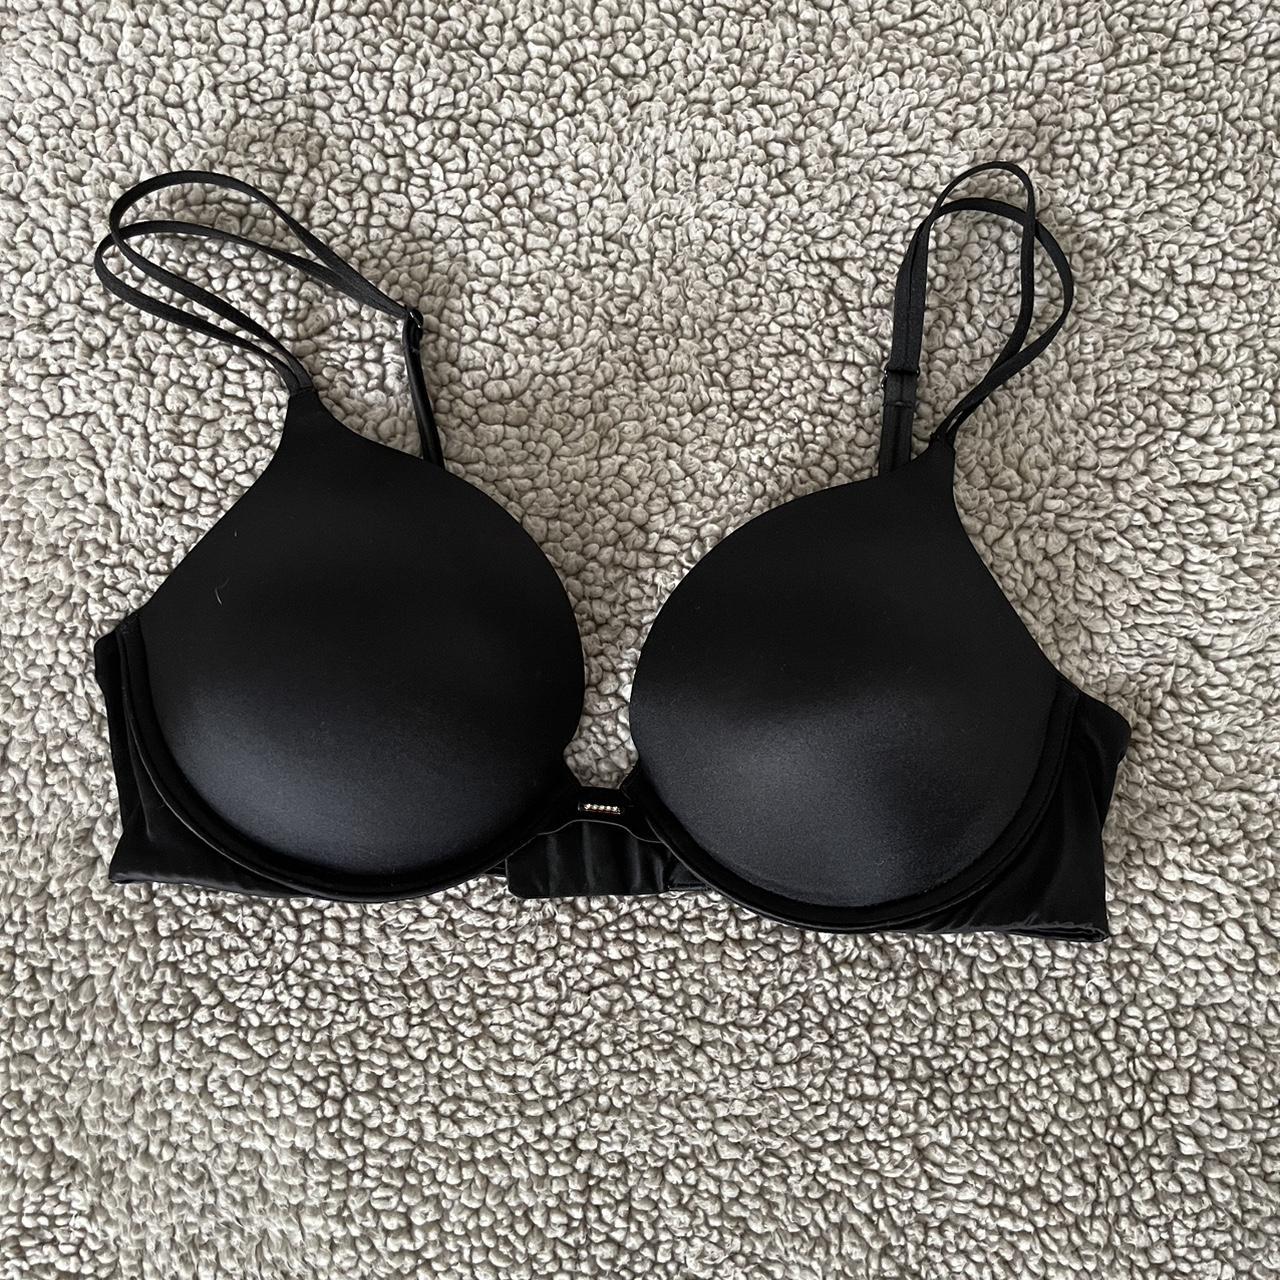 Victoria's Secret Push Up Bra 34C and Med Thong New iwith Tags